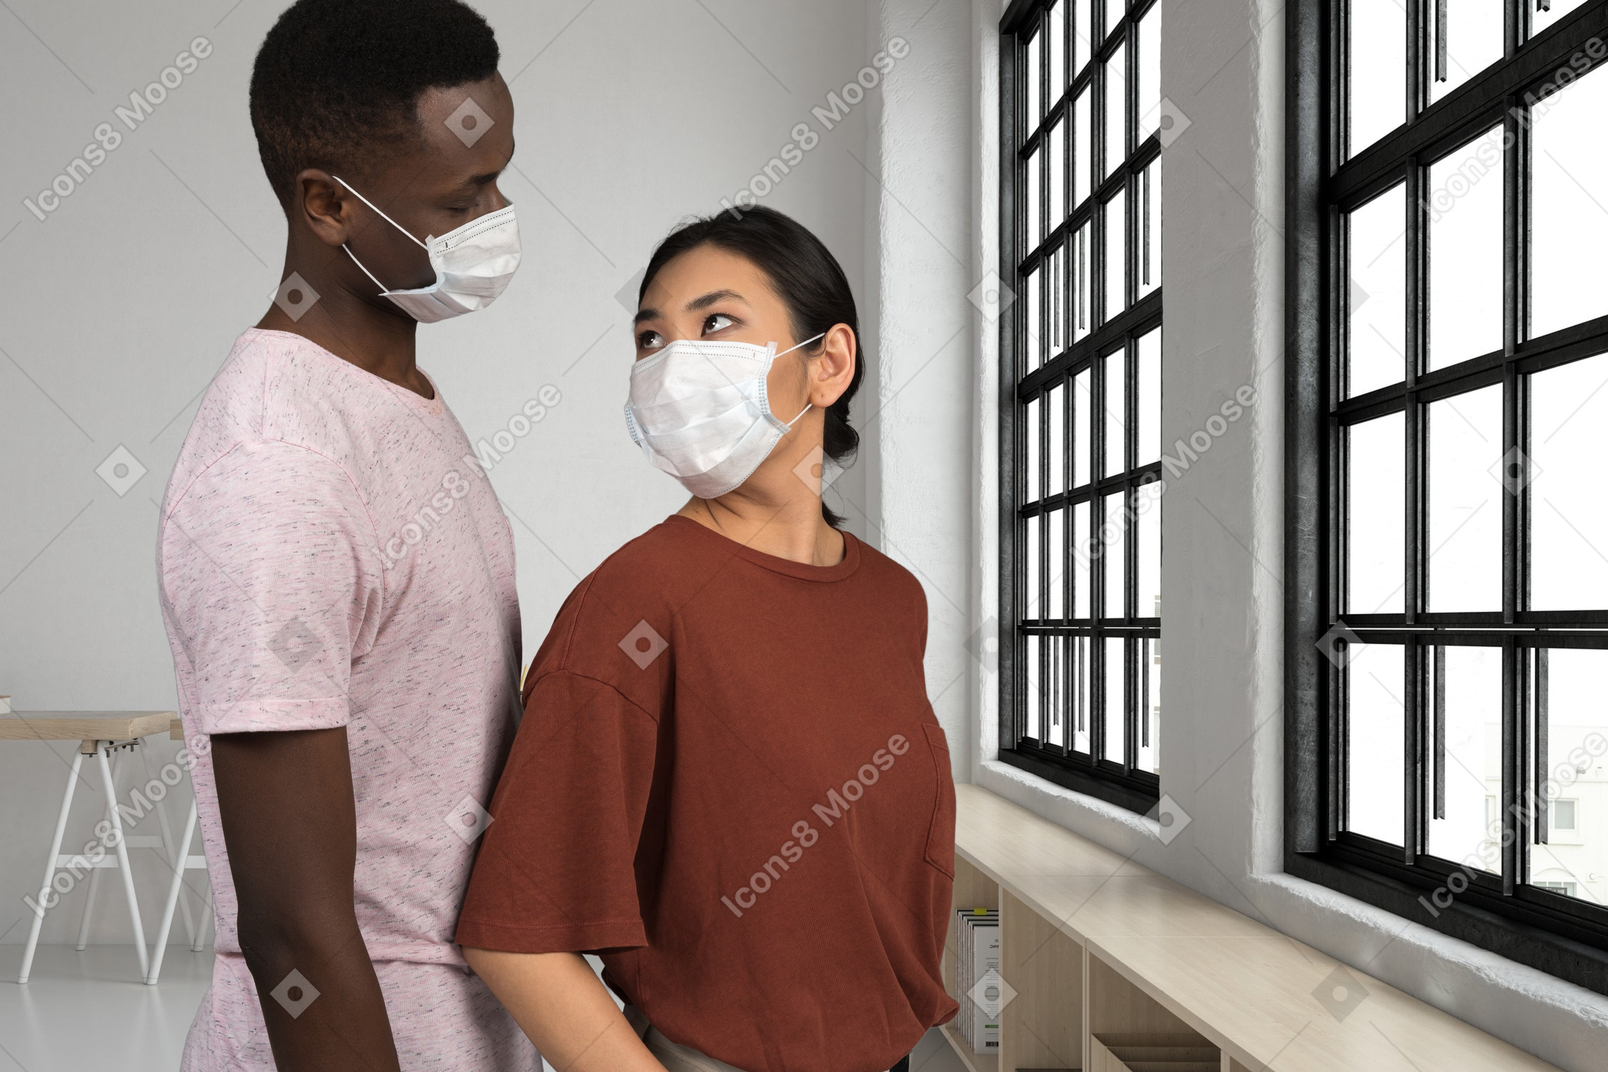 A man and a woman wearing face masks and looking at each other